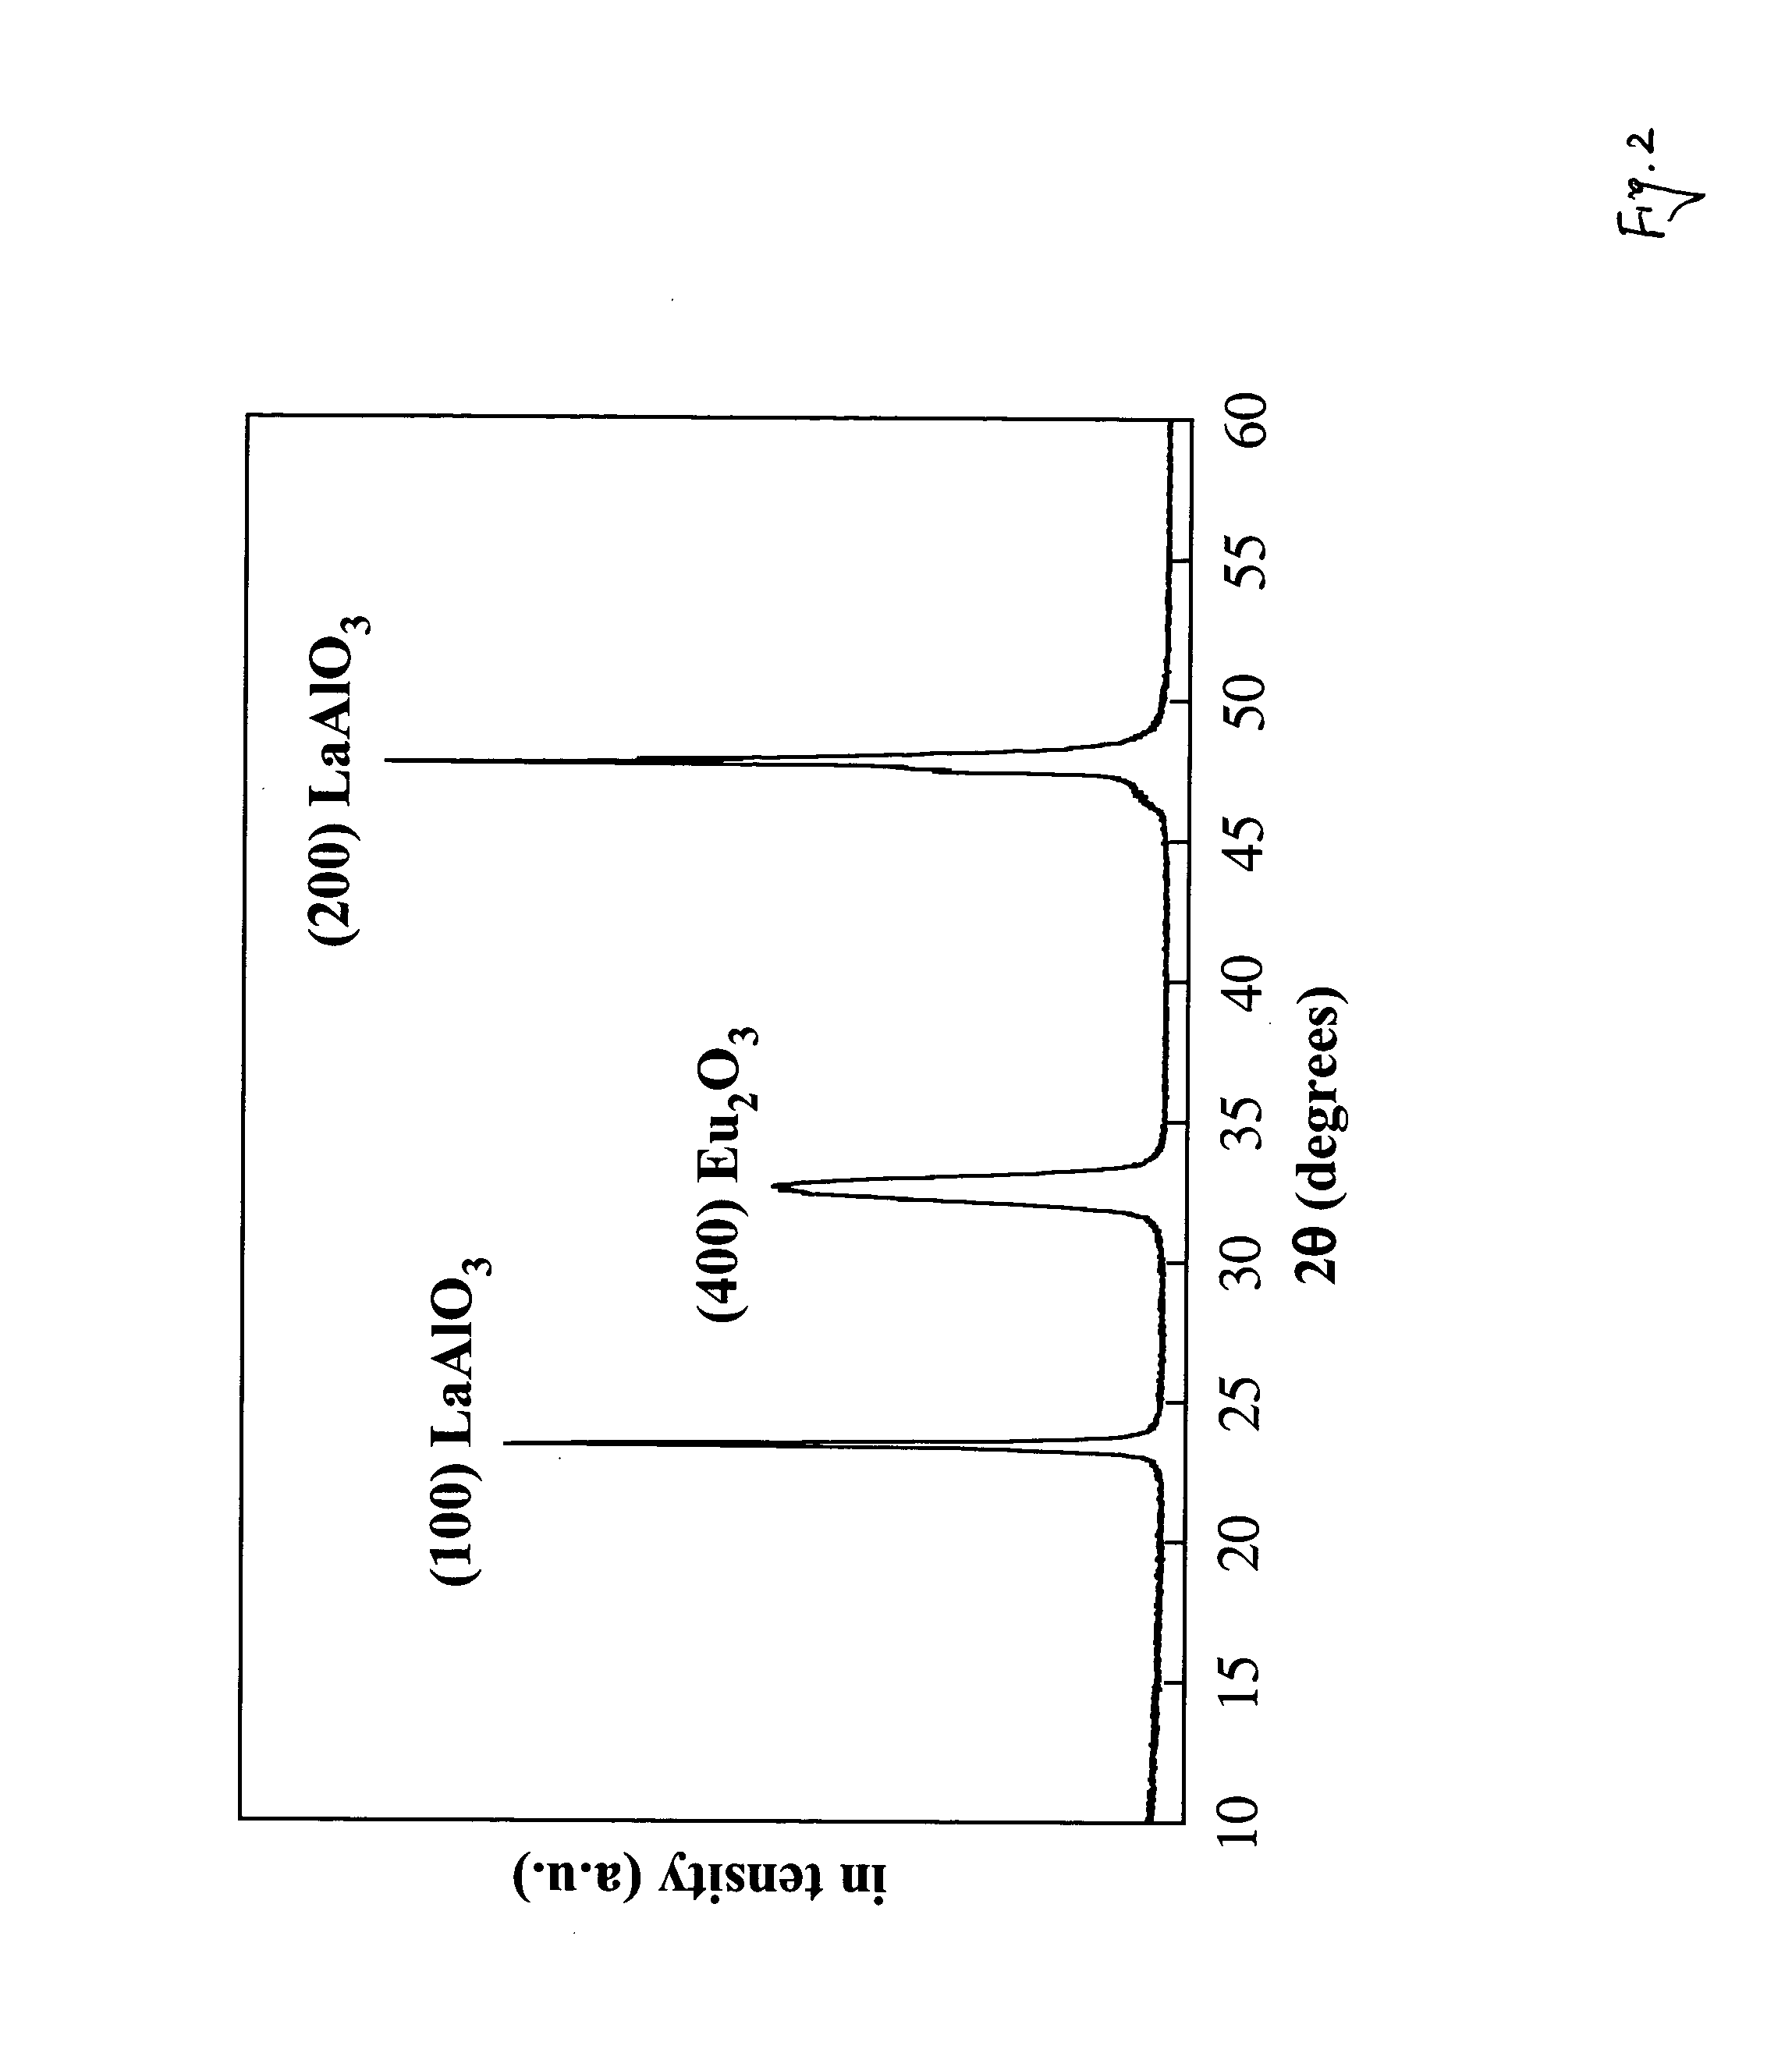 Polymer-assisted deposition of films